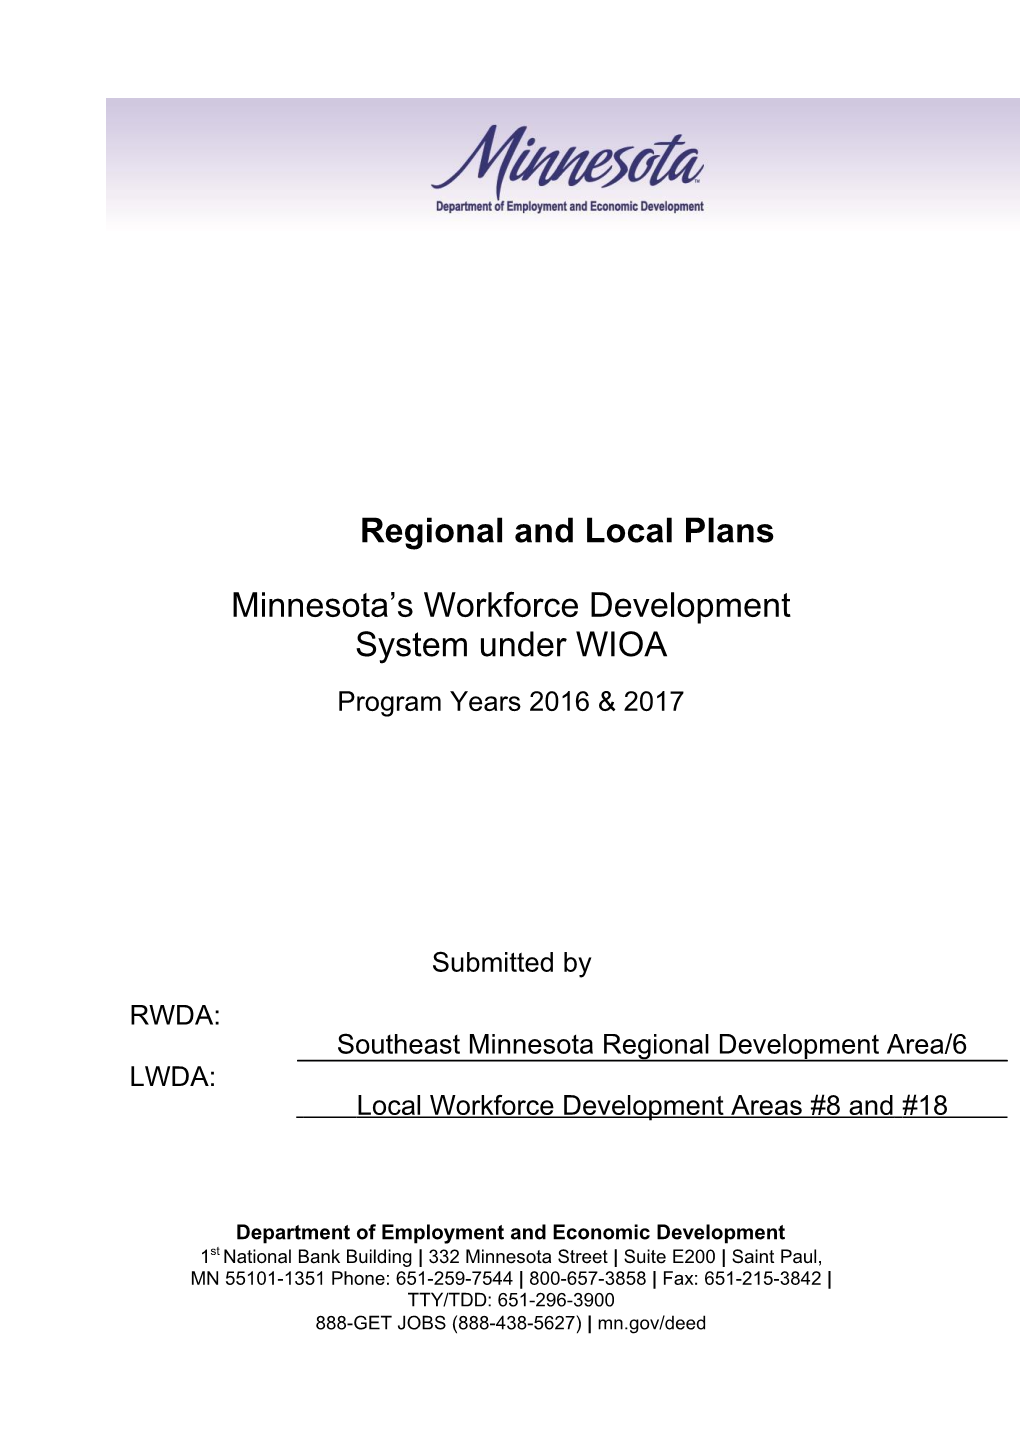 Regional and Local Plan Template